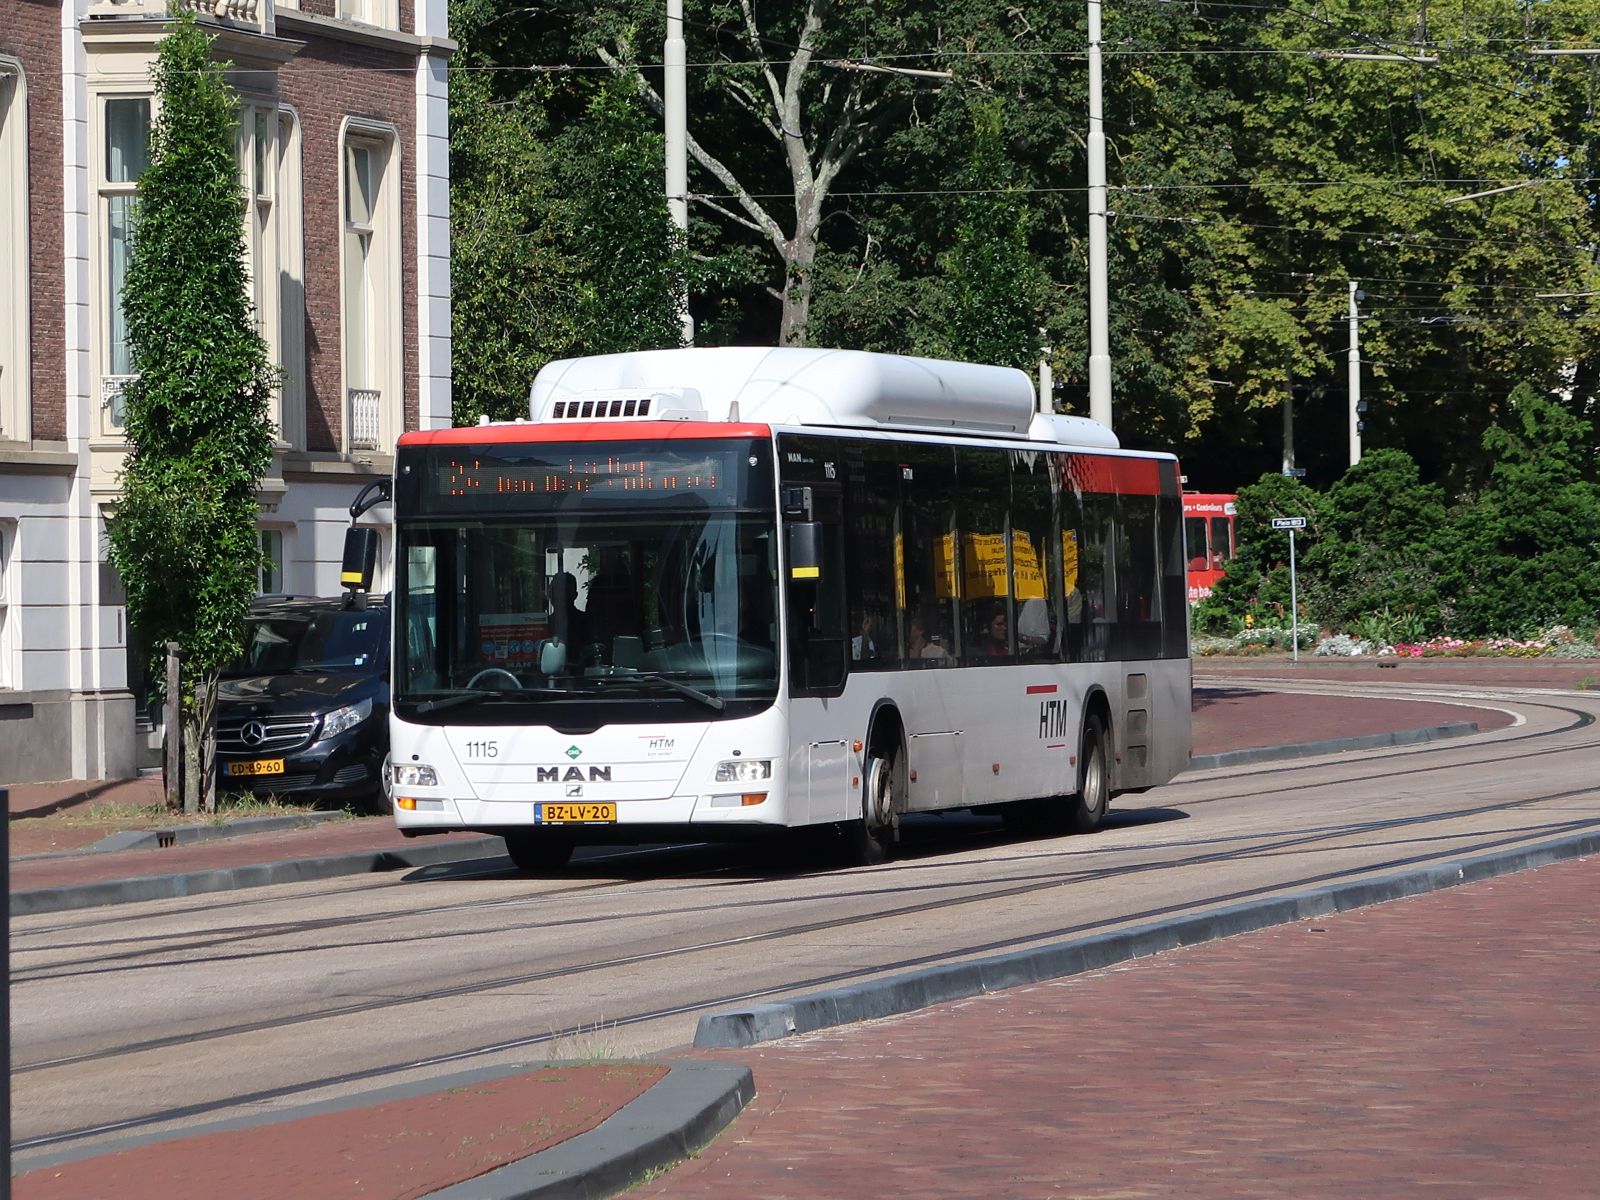 HTMBuzz Bus 1115 MAN Lions City CNG Baujahr 2011. Alexanderstraat, Den Haag 23-08-2023.

HTMBuzz bus 1115 MAN Lions City CNG bouwjaar 2011. Alexanderstraat, Den Haag 23-08-2023.